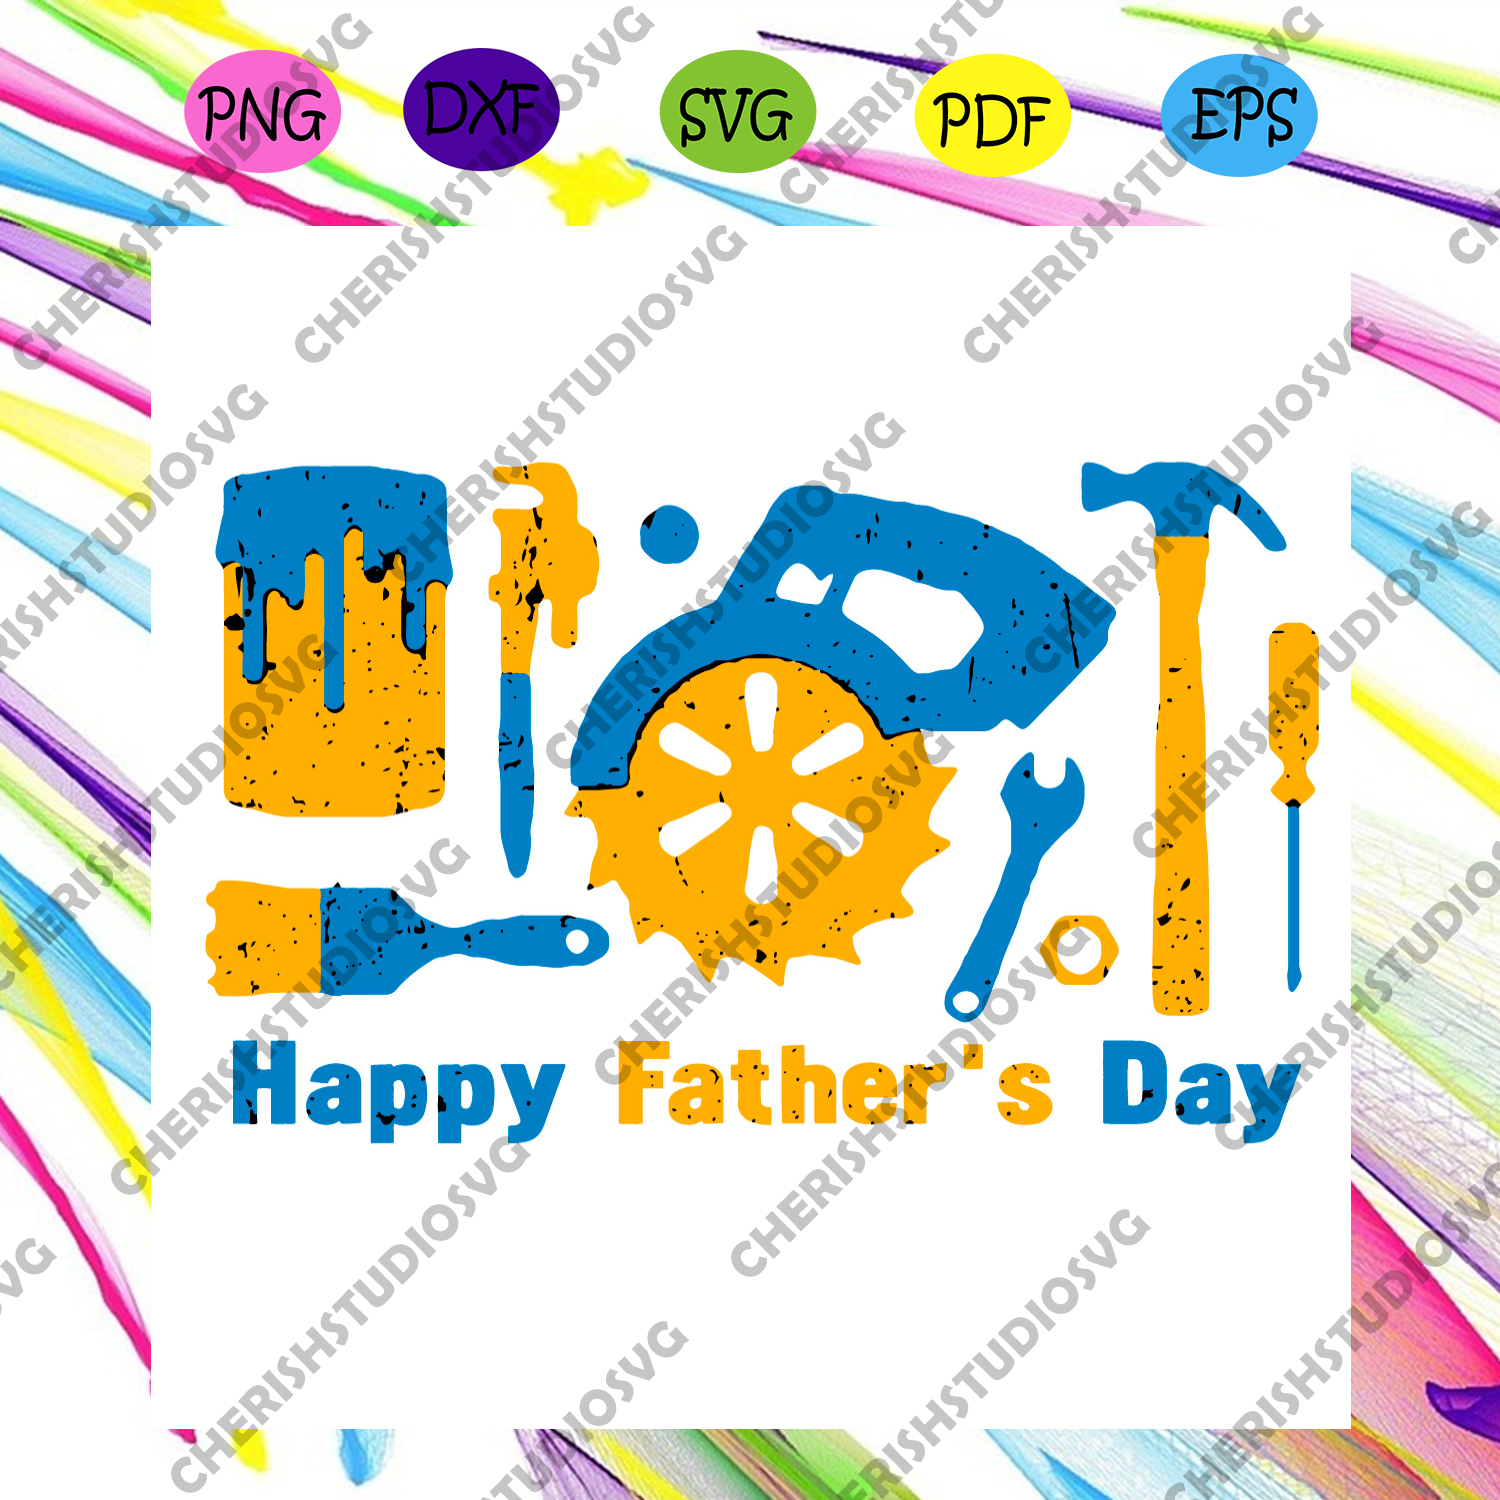 Download Happy Fathers Day Mechanic Tools Svg Fathers Day Svg Mechanic Tools Cherishsvgstudio